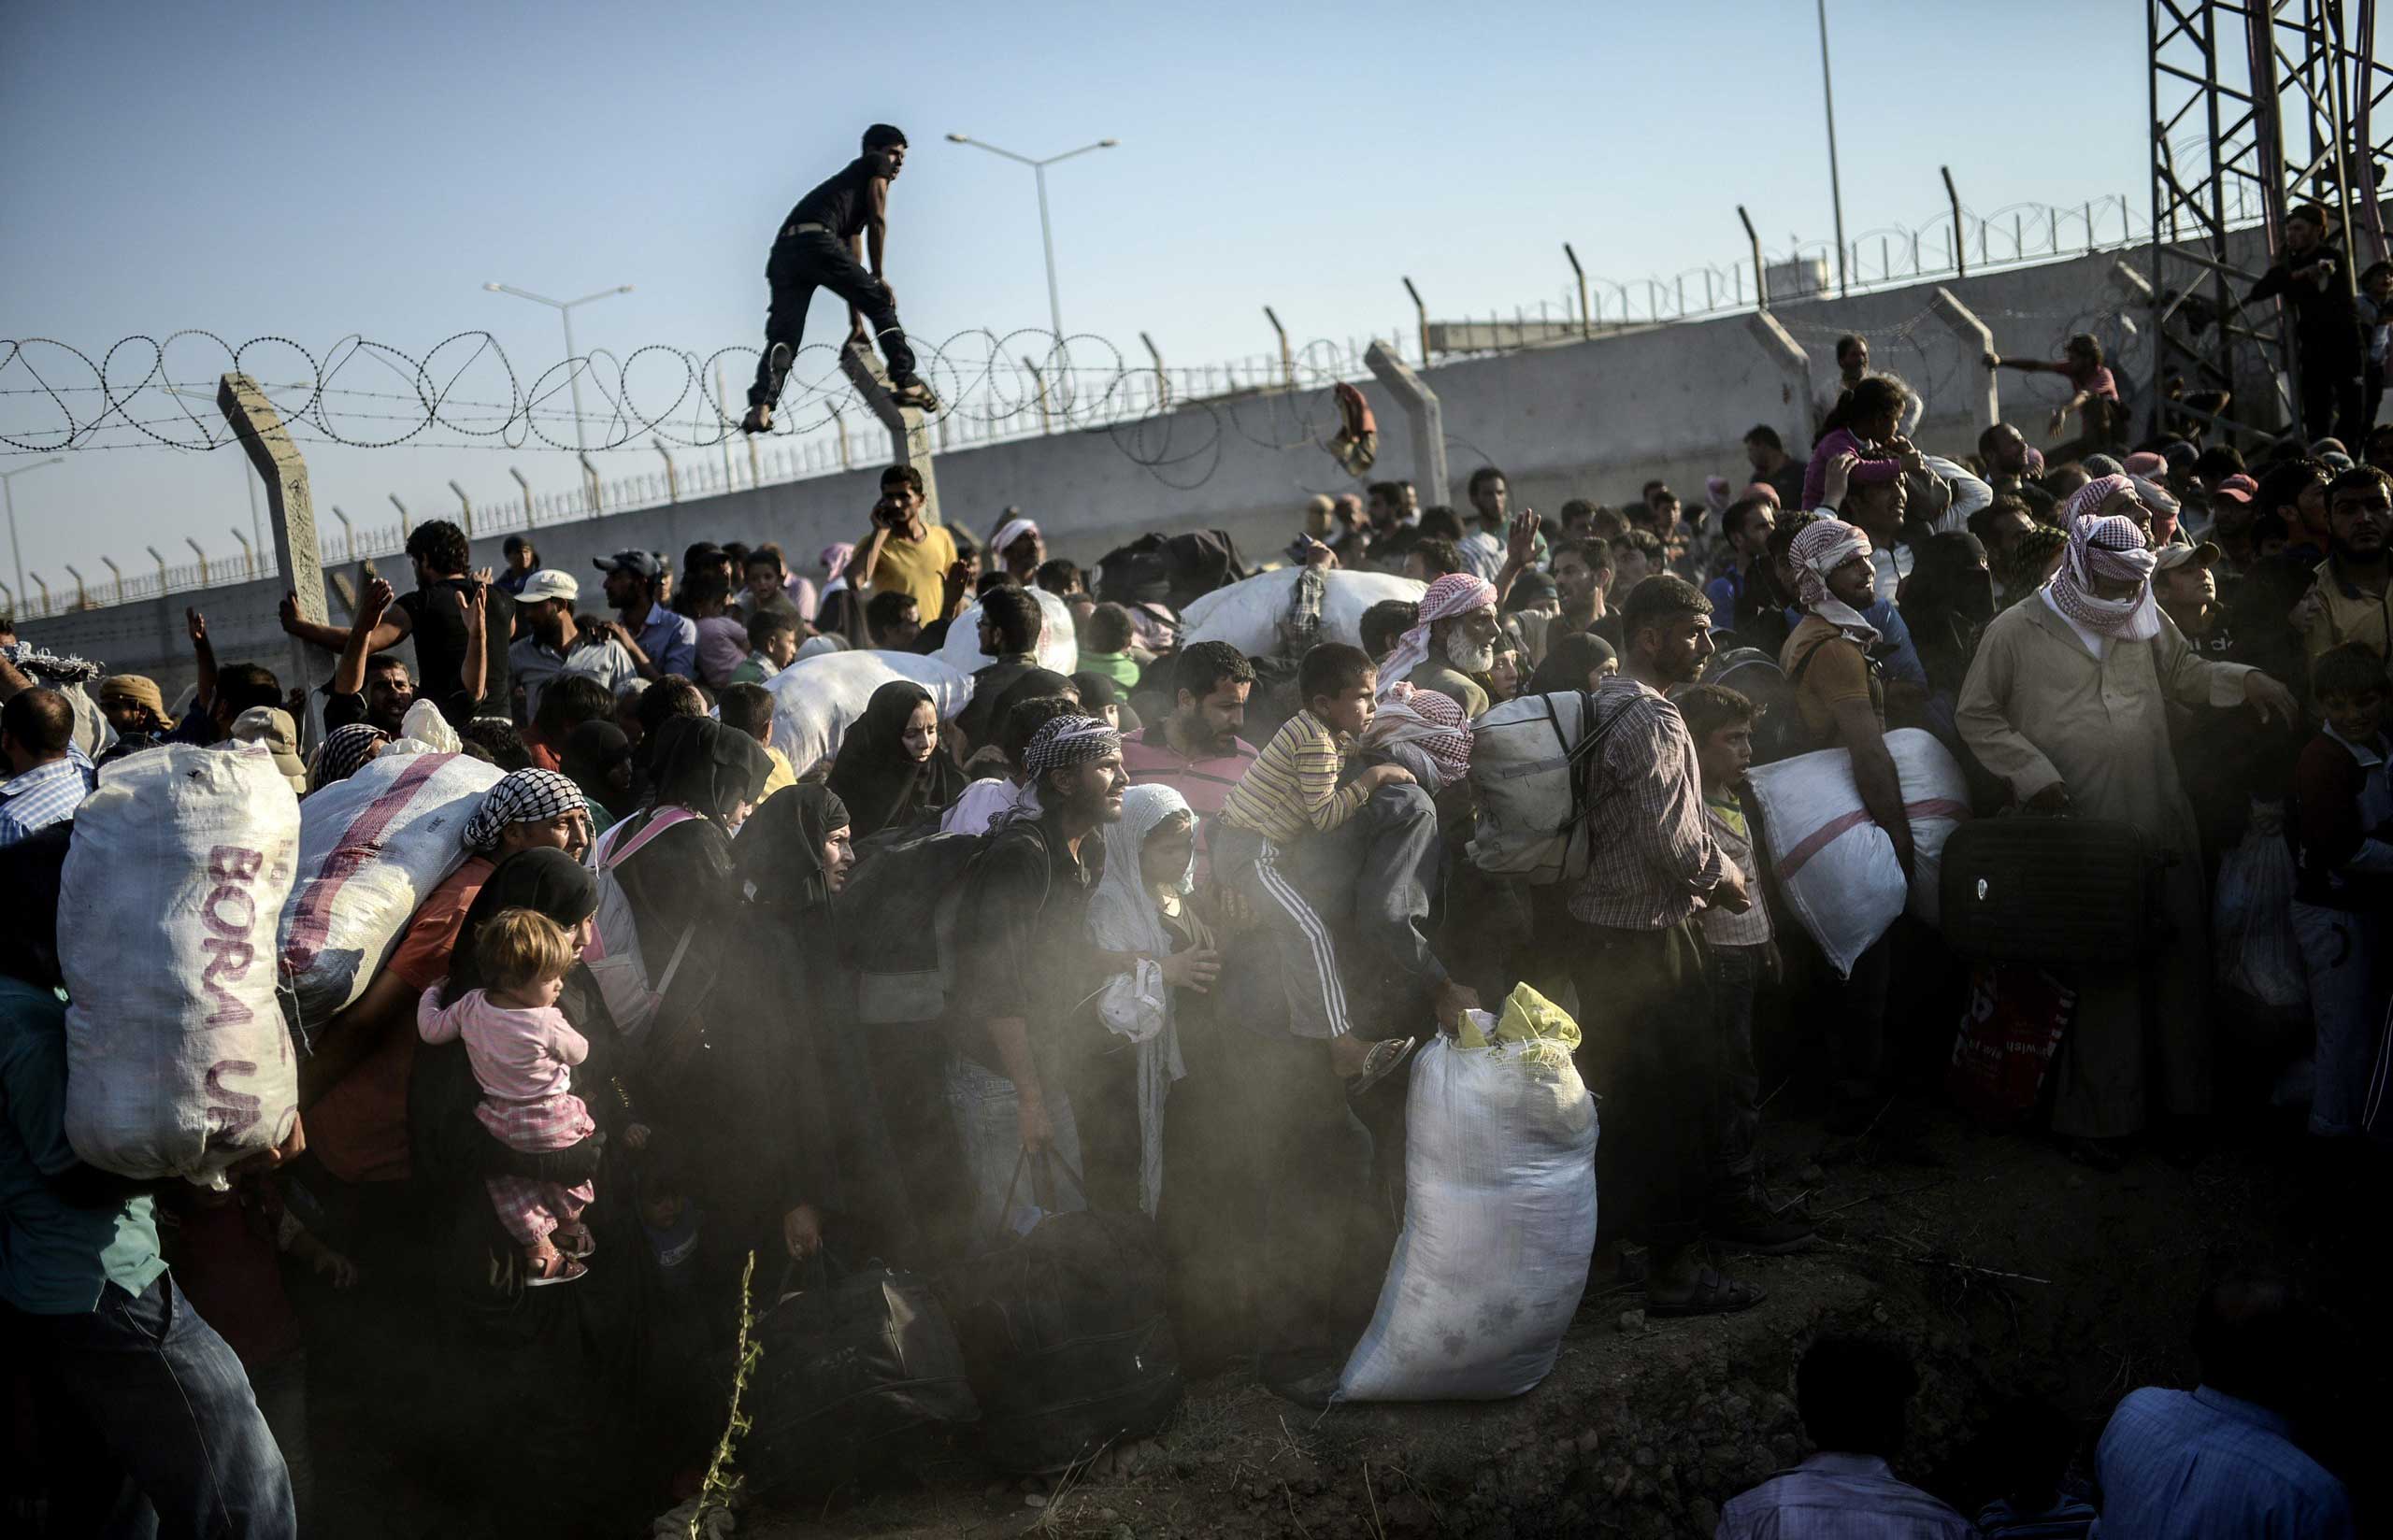 Syrians fleeing the war pass through broken border fences to illegally enter Turkish territory, near the Turkish border crossing at Akçakale, in Sanliurfa province, on June 14, 2015.